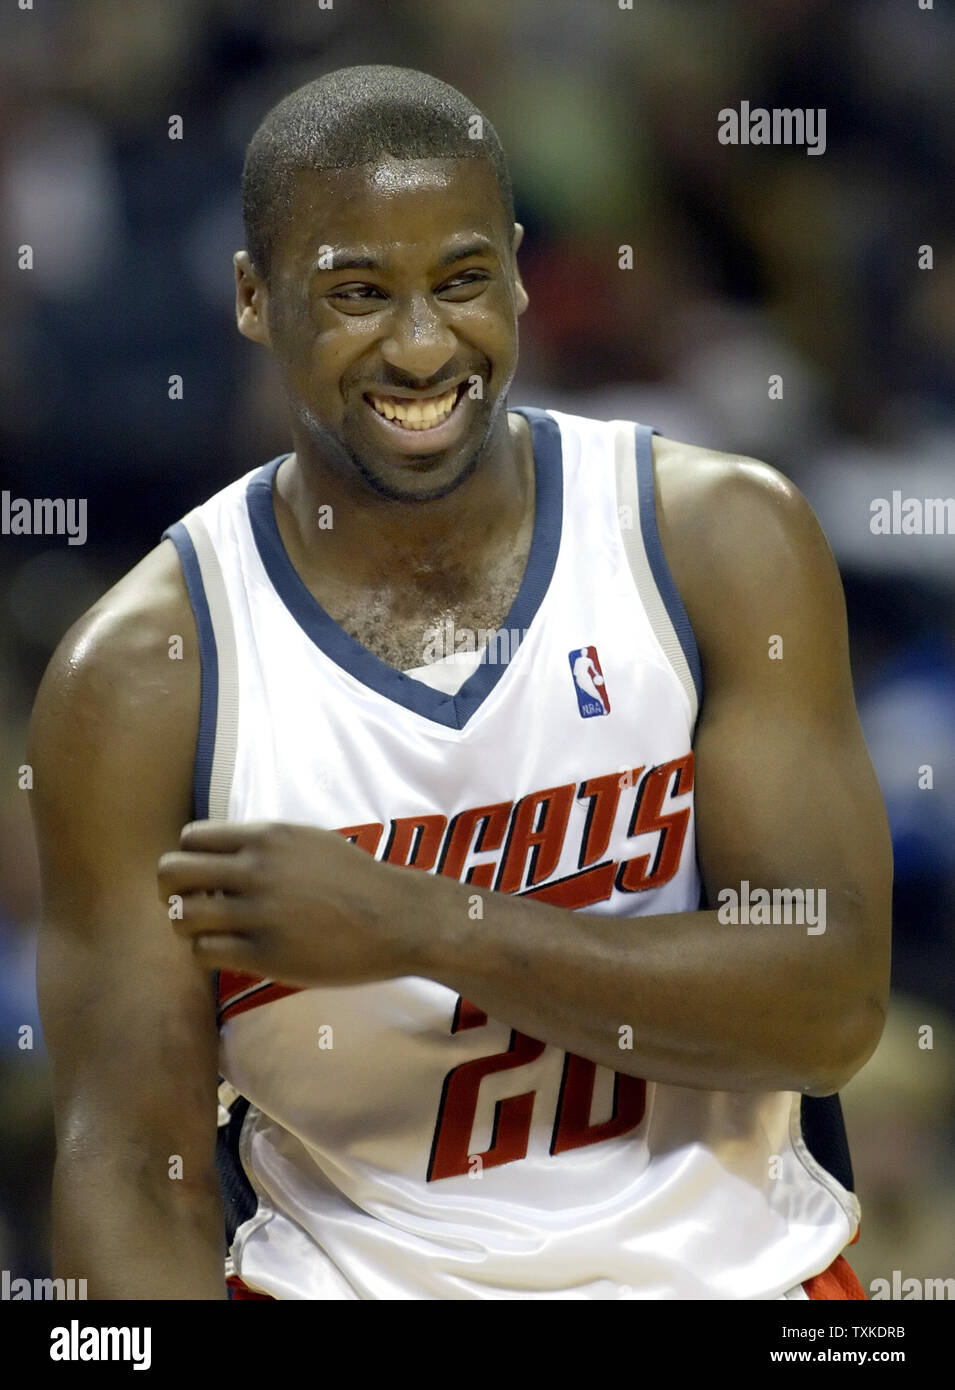 Charlotte Bobcats guard Raymond Felton laughs during a break in the action as Charlotte plays the Miami Heat in the second half at the Charlotte Bobcats Arena in Charlotte, N.C. on April 10, 2007. Charlotte won 92-82. (UPI Photo/Nell Redmond) Stock Photo